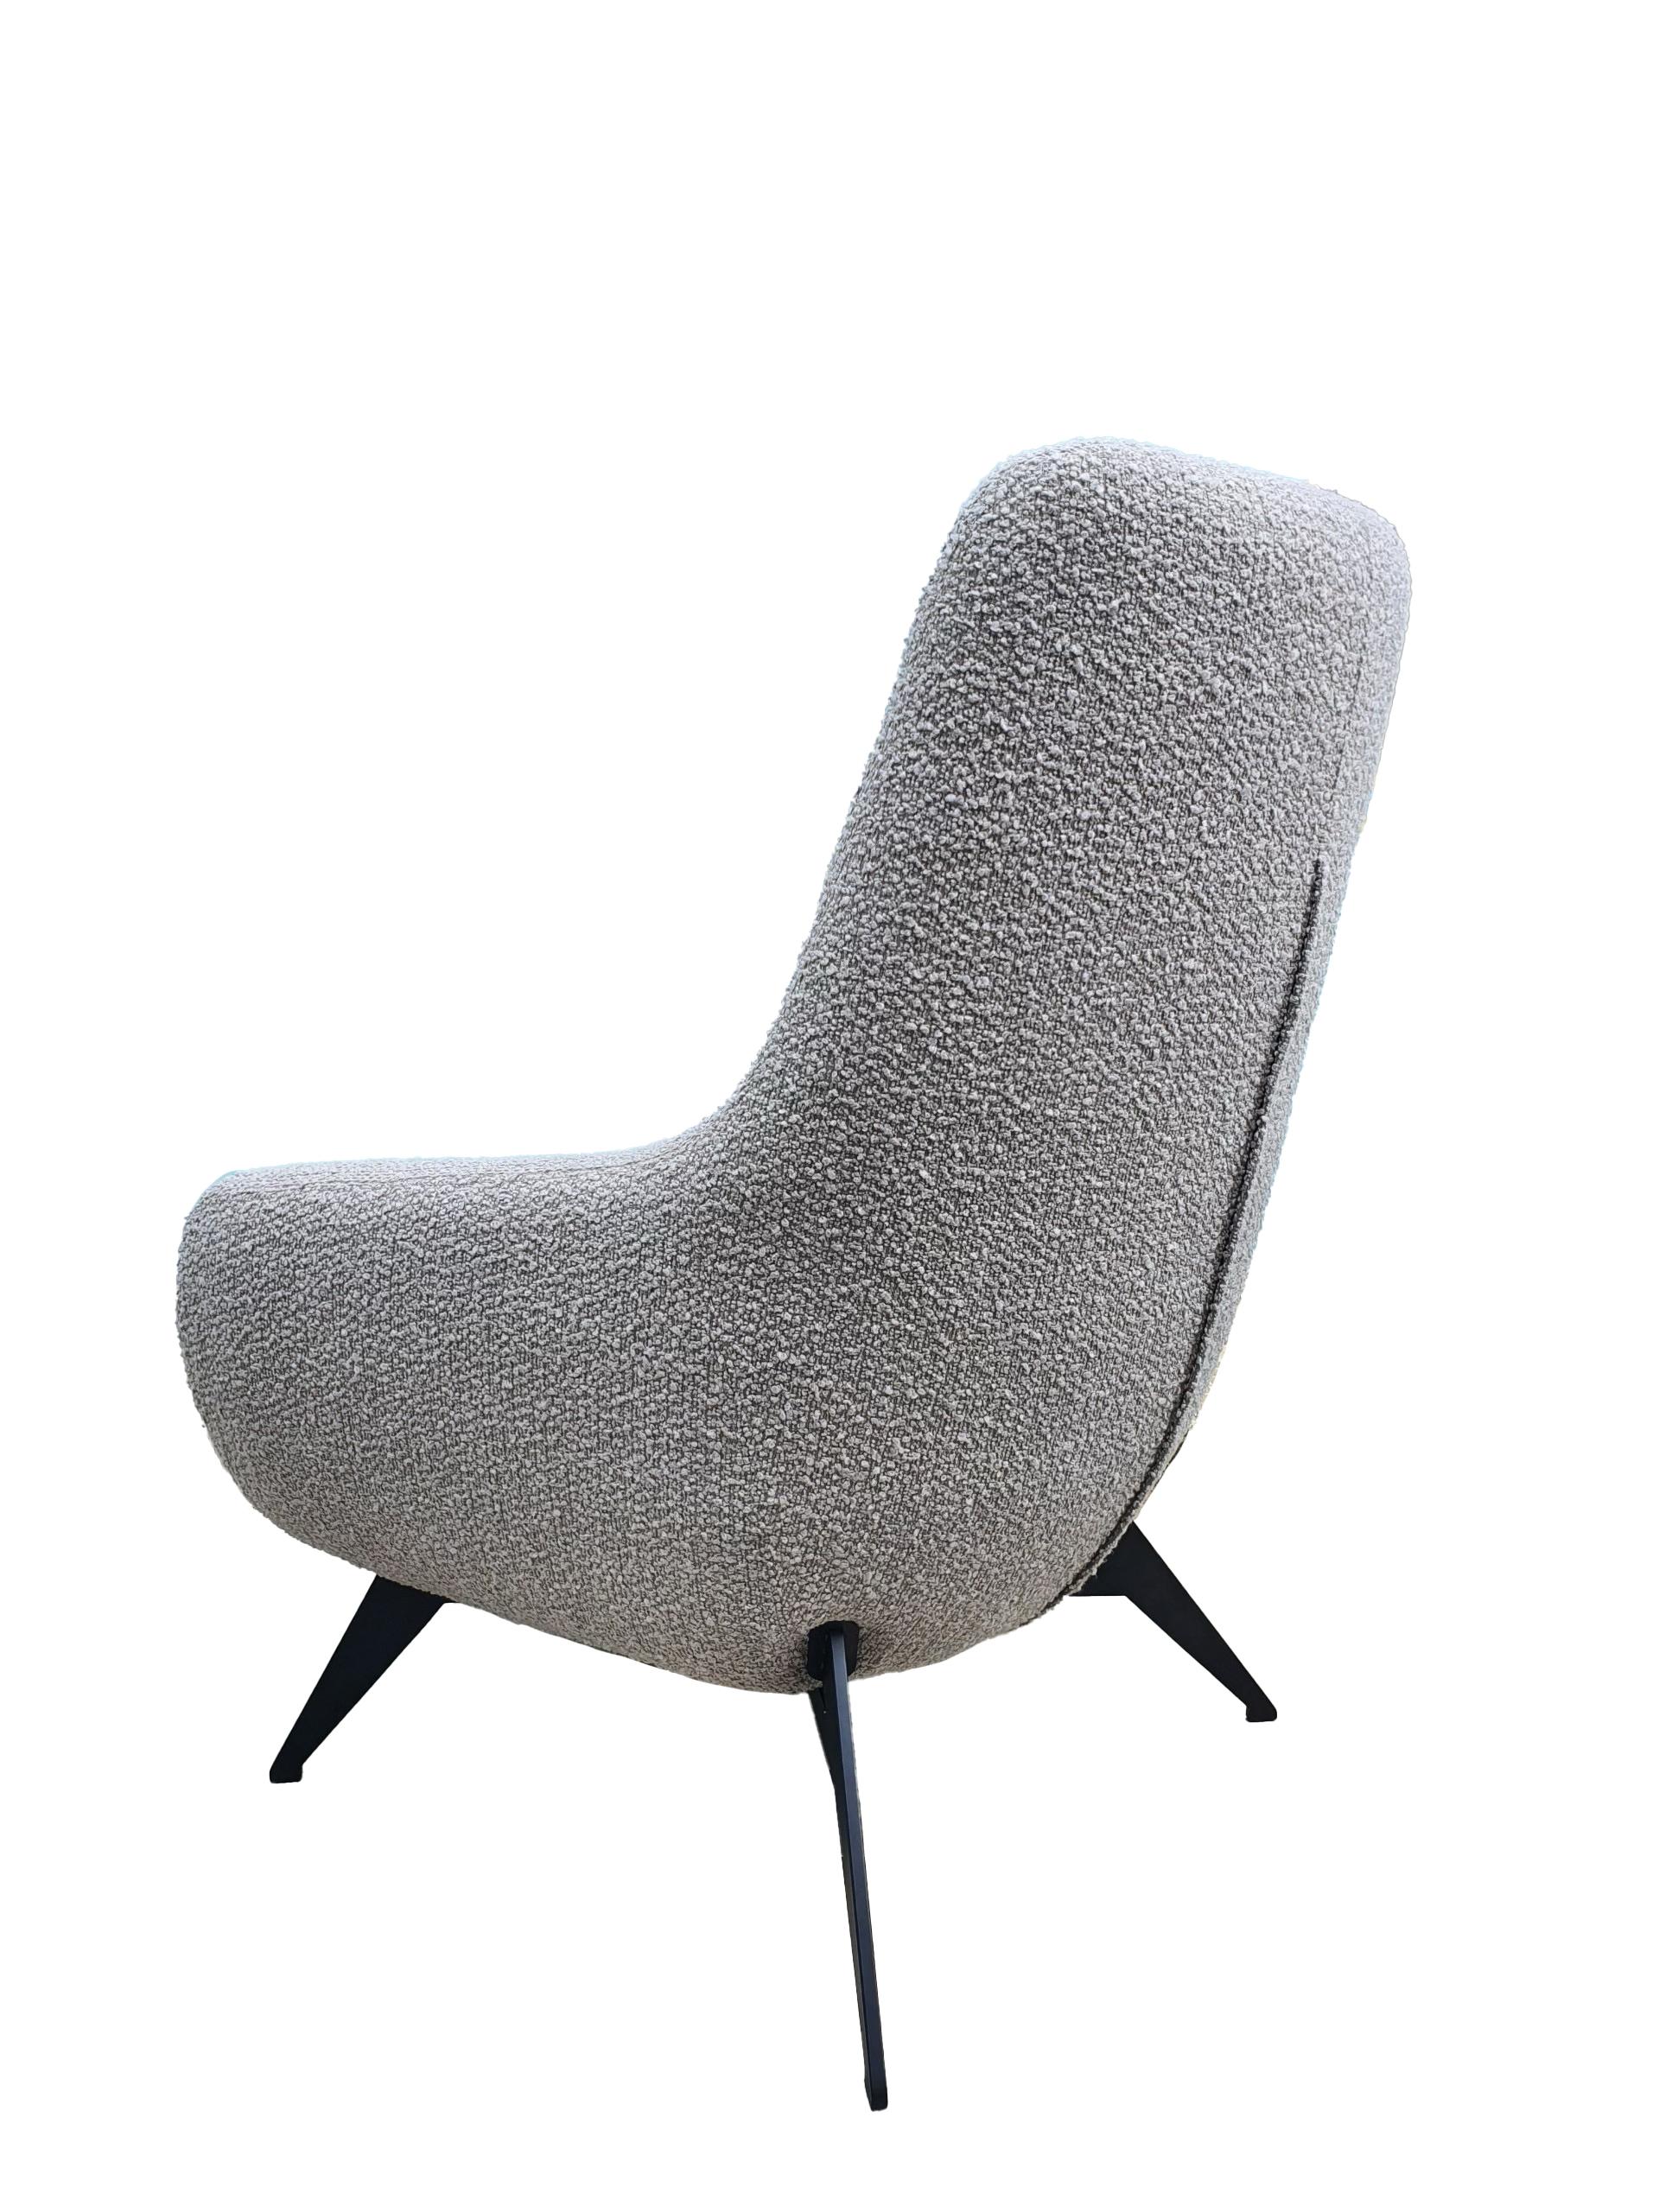 Vietnamese Lounge Chair - Modern Sculptural Seating For Sale